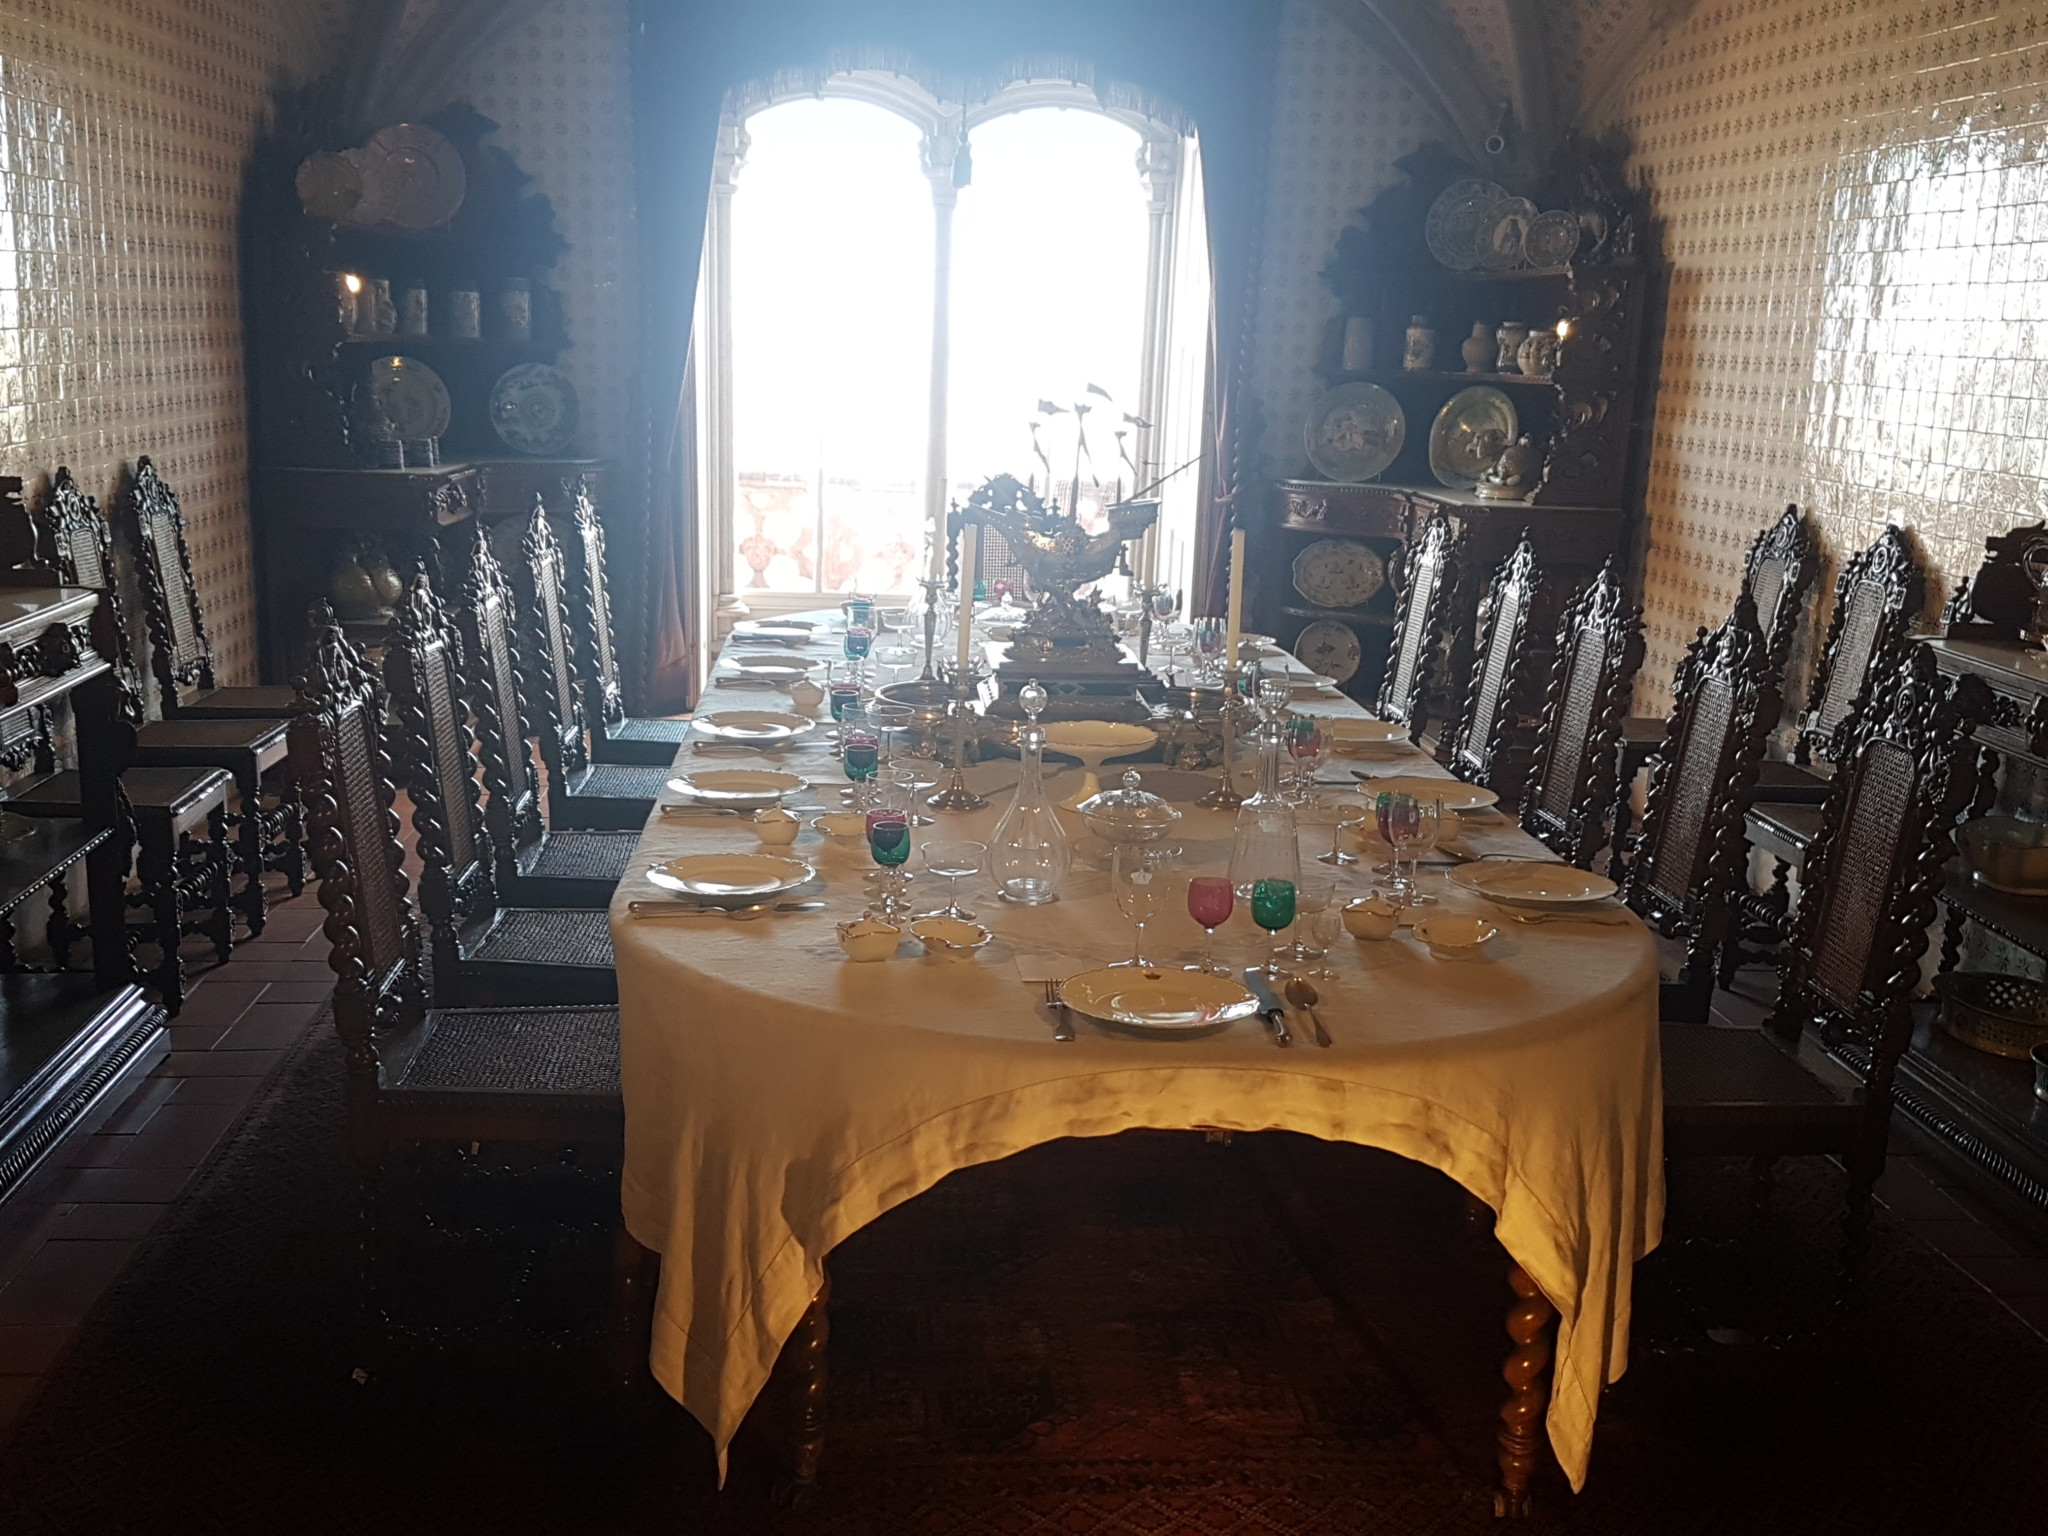 Pena Palace - Dining Table